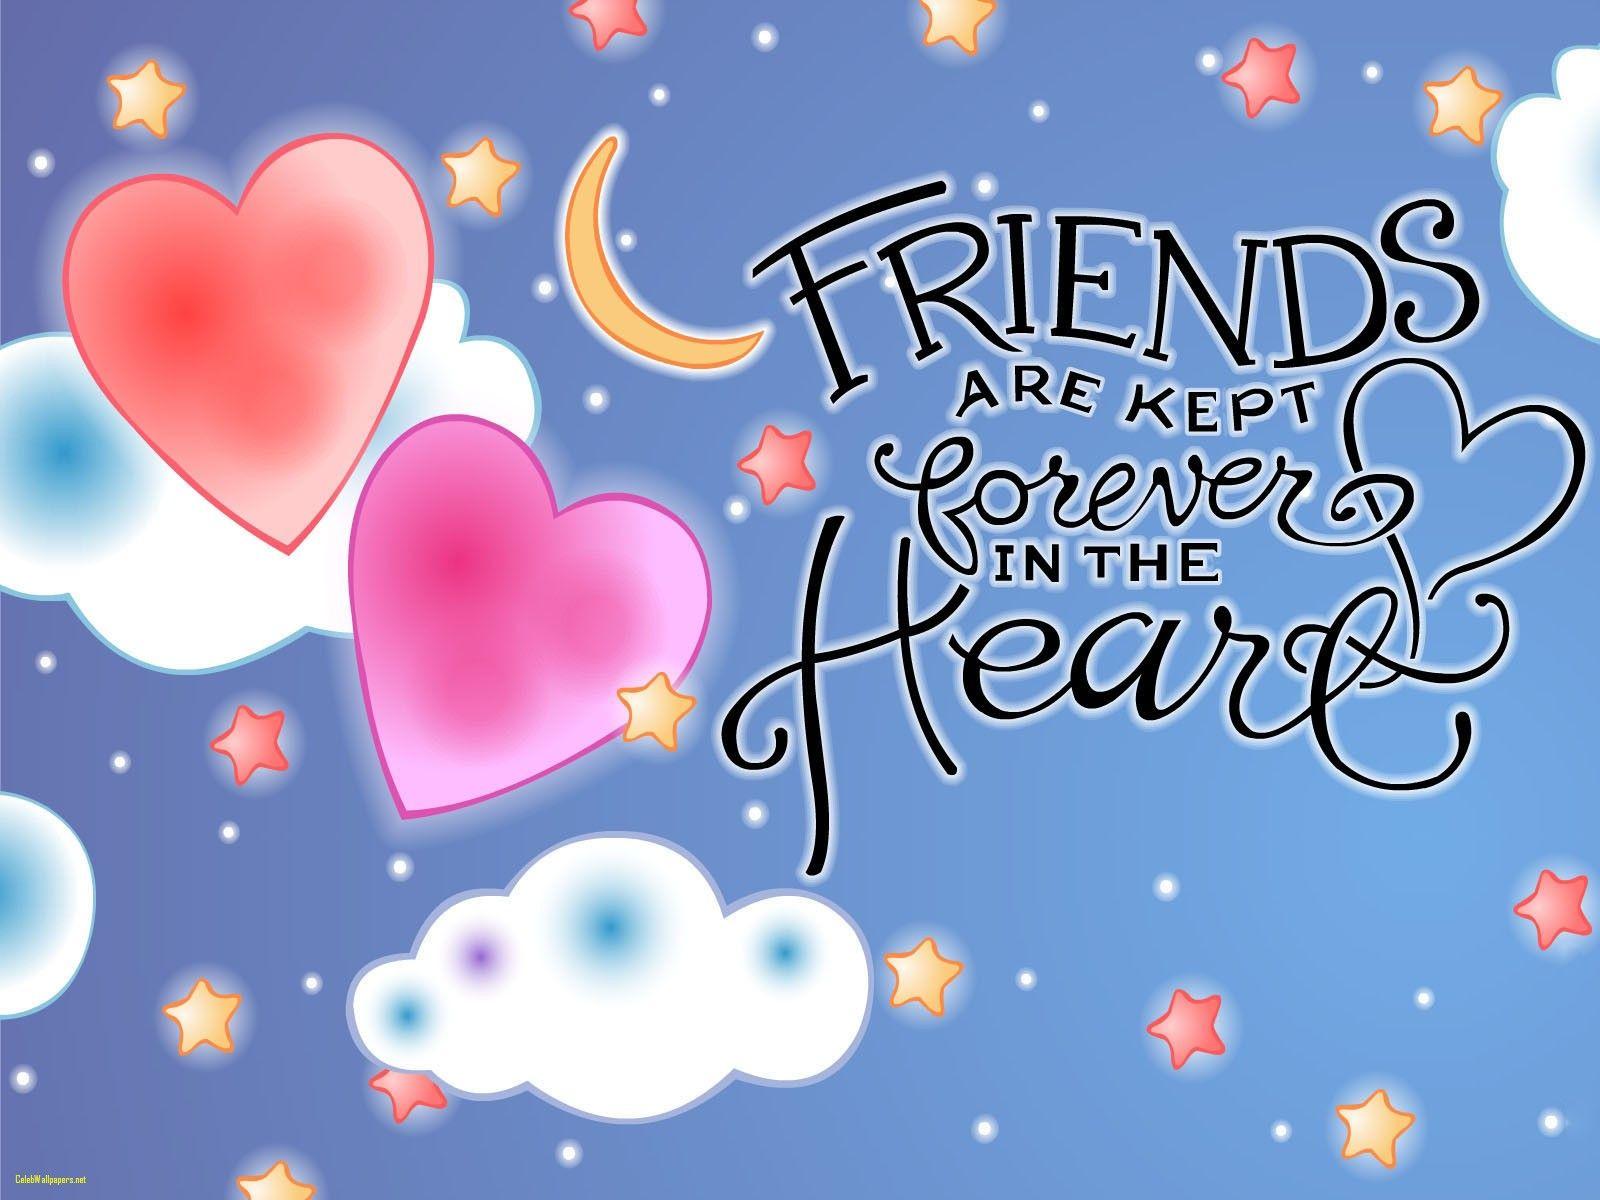 Everlasting Friendship Wallpaper and Friendship Quotes Best Of